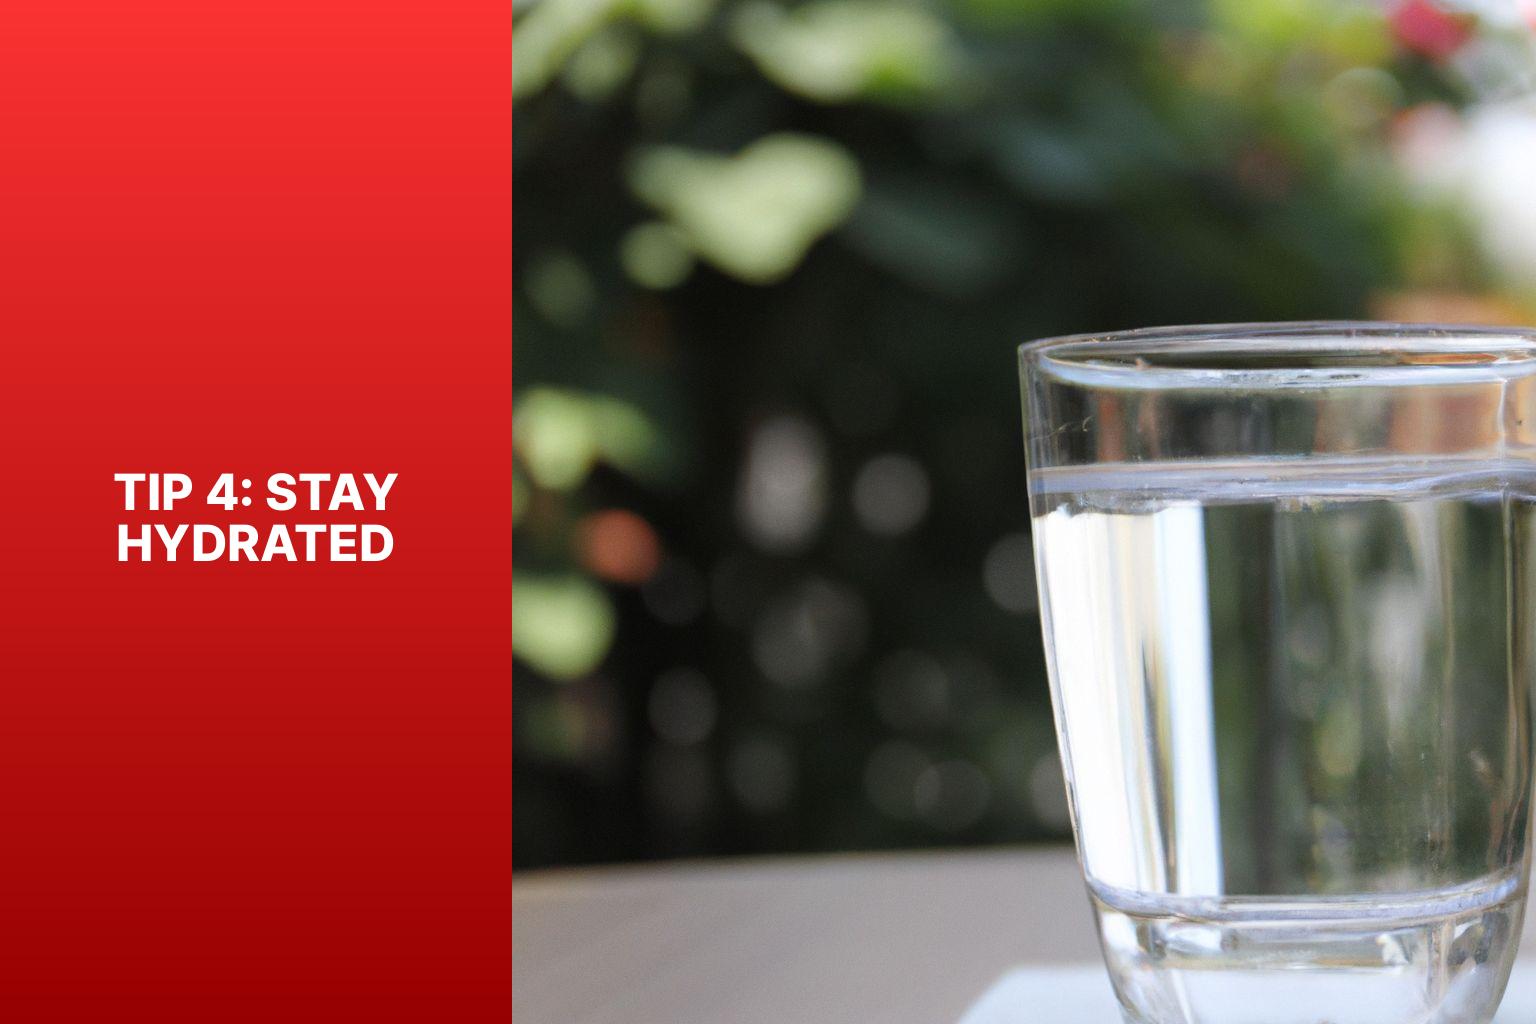 Tip 4: Stay Hydrated - 10 Essential Health Tips for a Happy and Active Life 